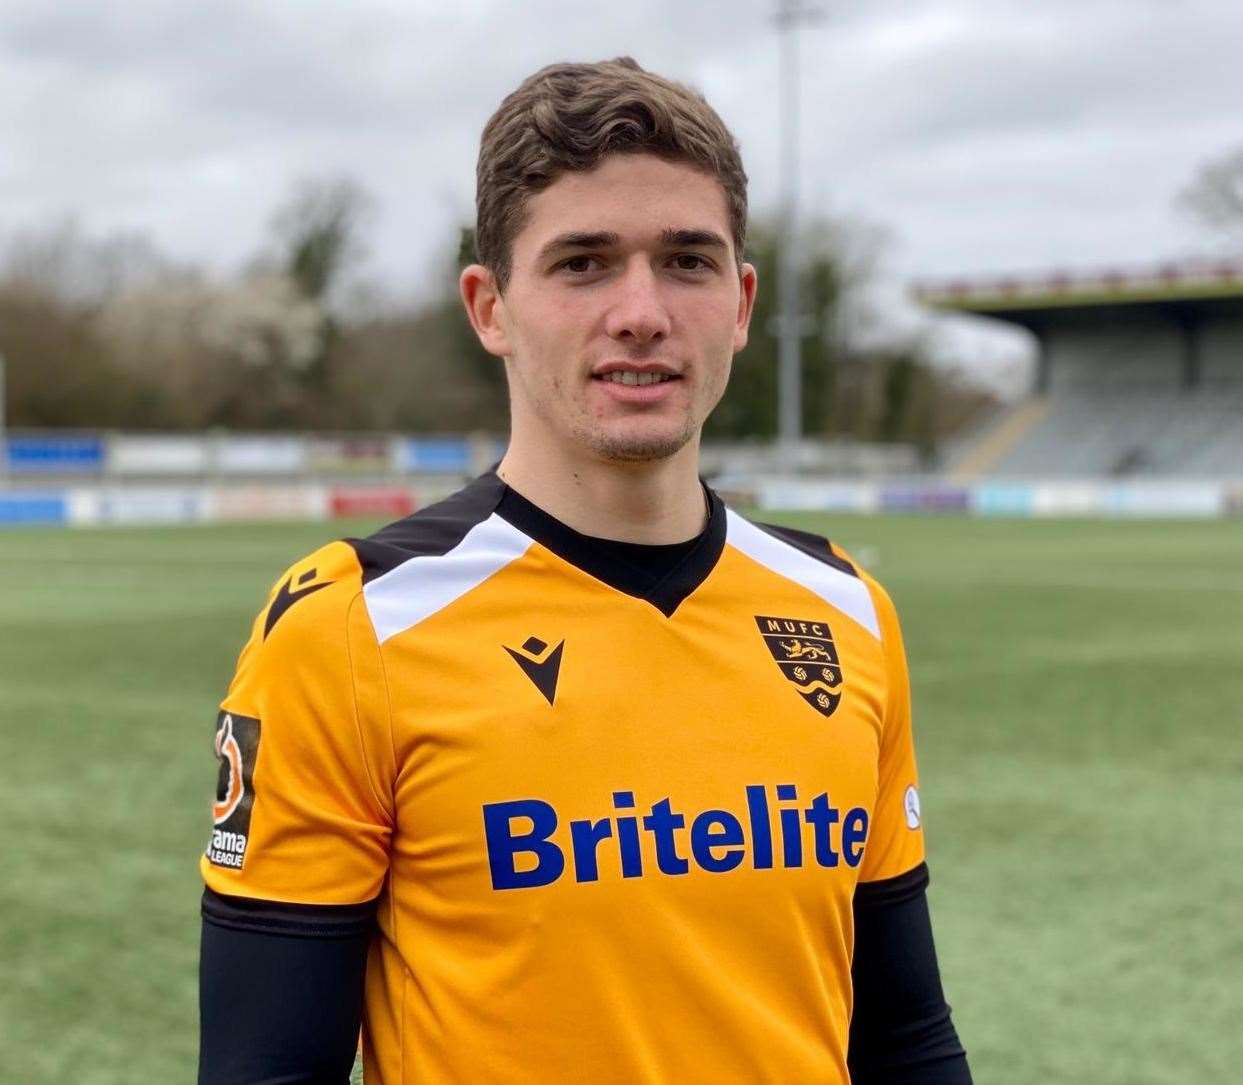 Max Watters finished last season on loan at Maidstone United and was close to signing a permanent deal before Crawley pounced